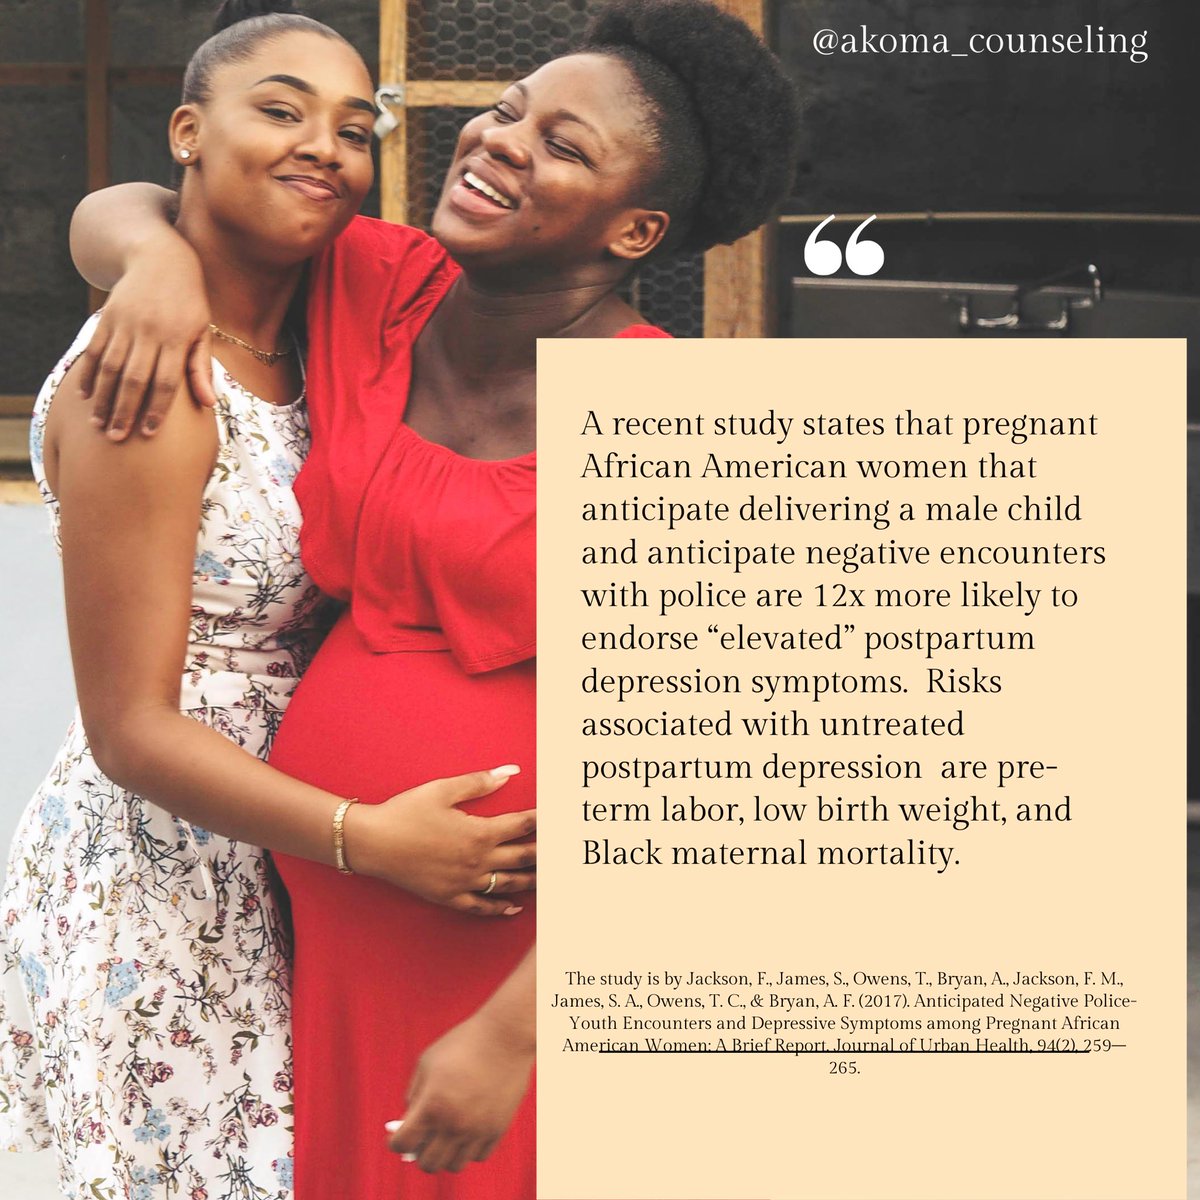 Pregnant Black women that anticipate delivering a male child & anticipate negative encounters w/ police are 12x more likely to endorse “elevated” #postpartumdepression (PPD) symptoms.  A Risk associated w/untreated PPD is maternal mortality. #blackmaternalmentalhealthweek